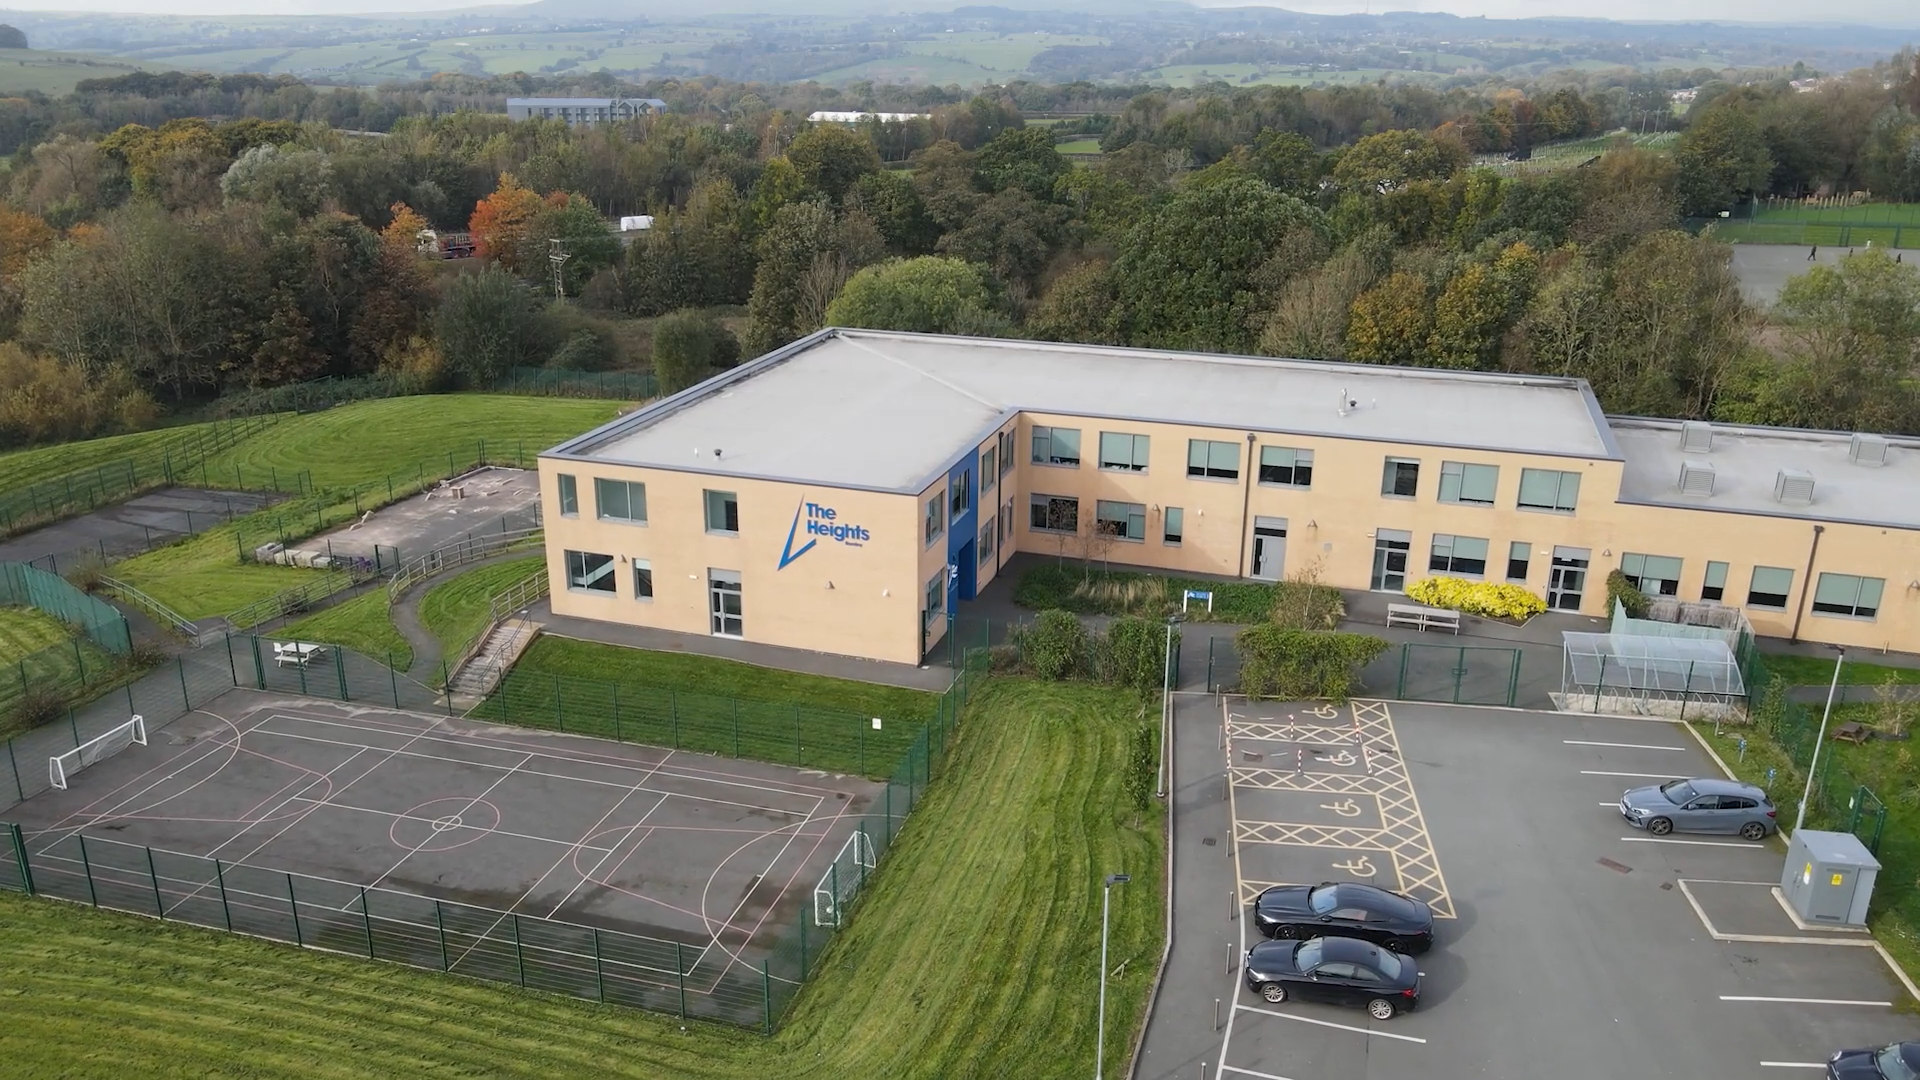 Aerial view of The Heights School, a modern building on the edge of Burnley, with the Forest of Bowland in the background.